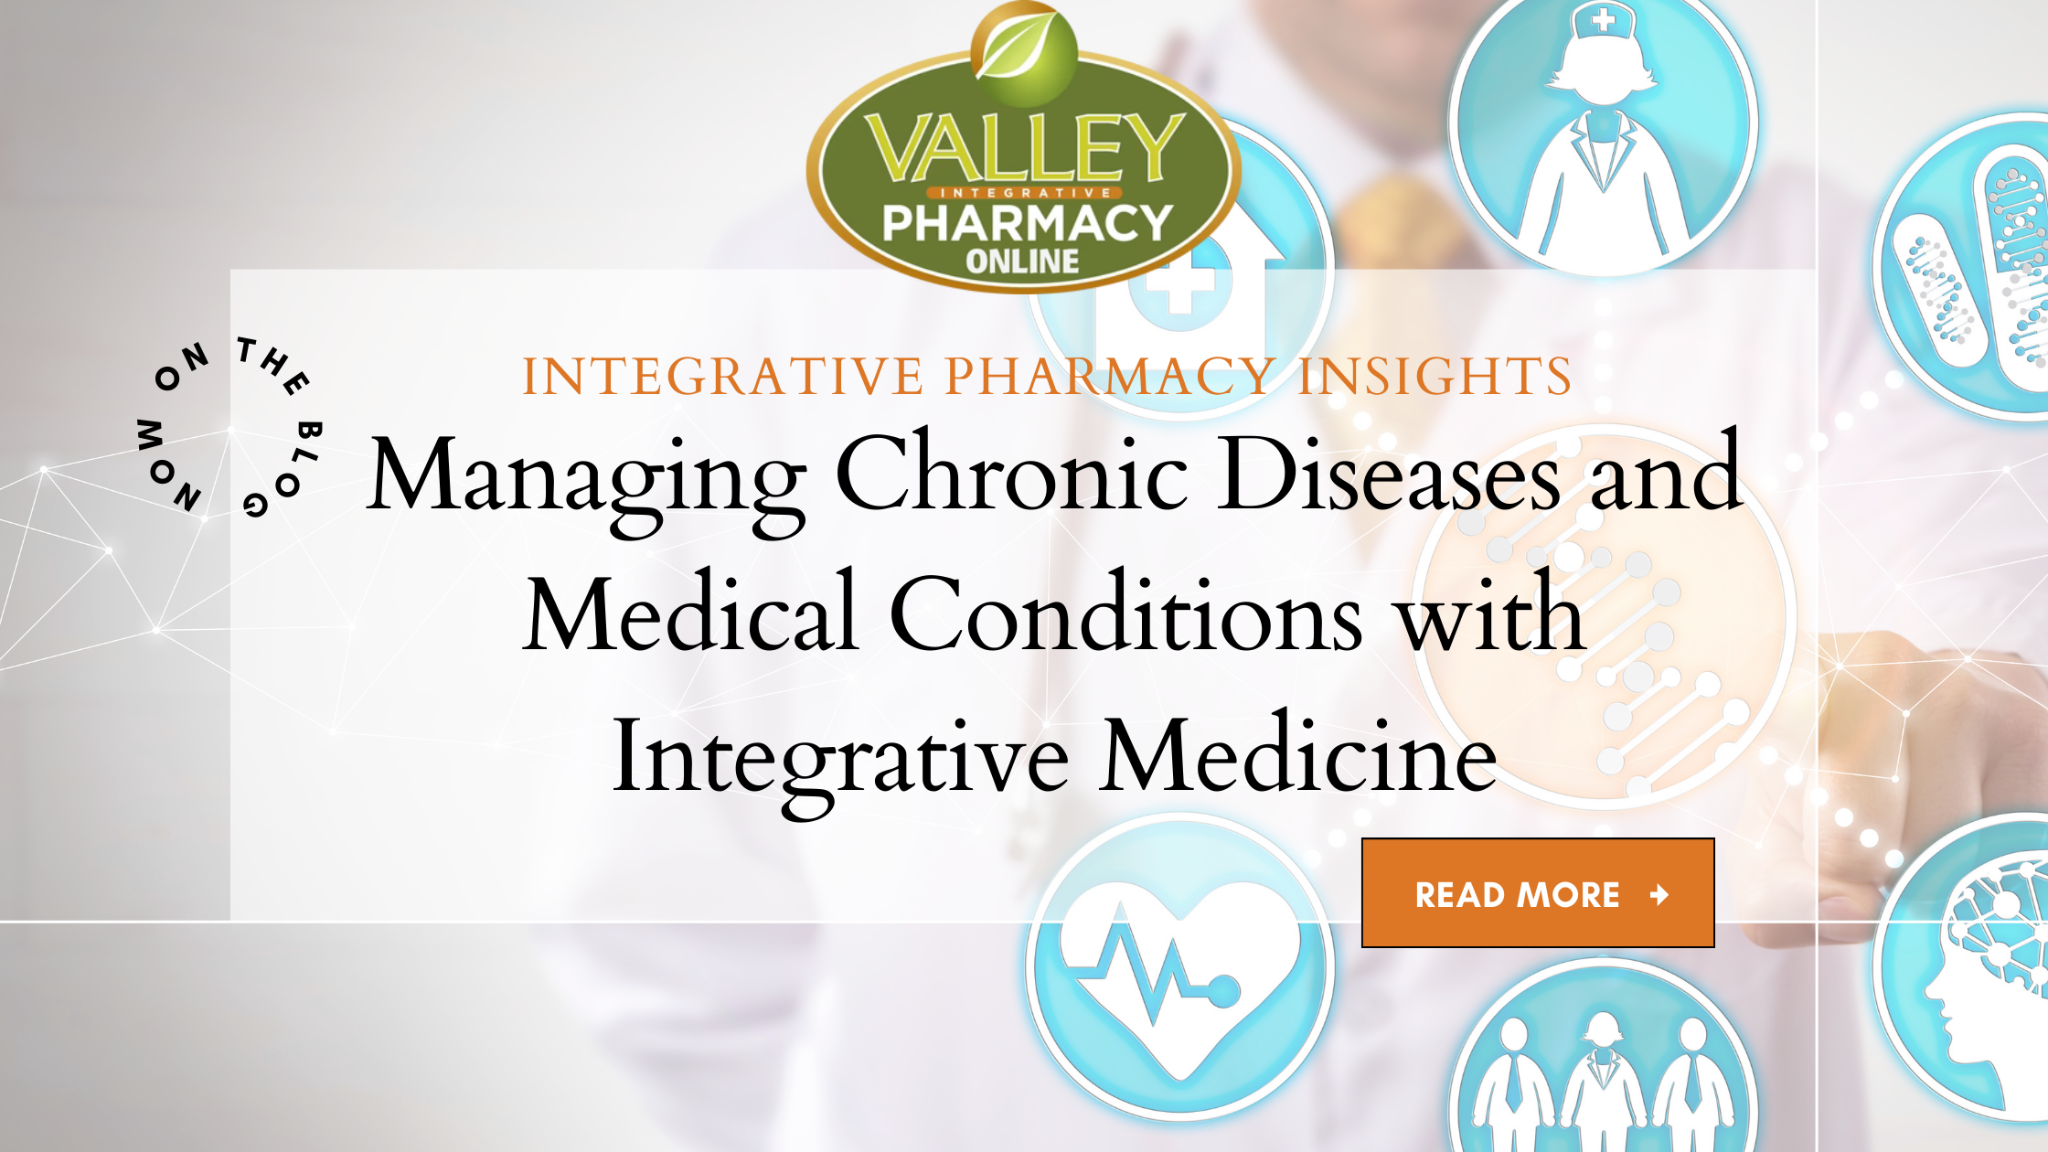 Managing Chronic Diseases and Medical Conditions with Integrative Medicine